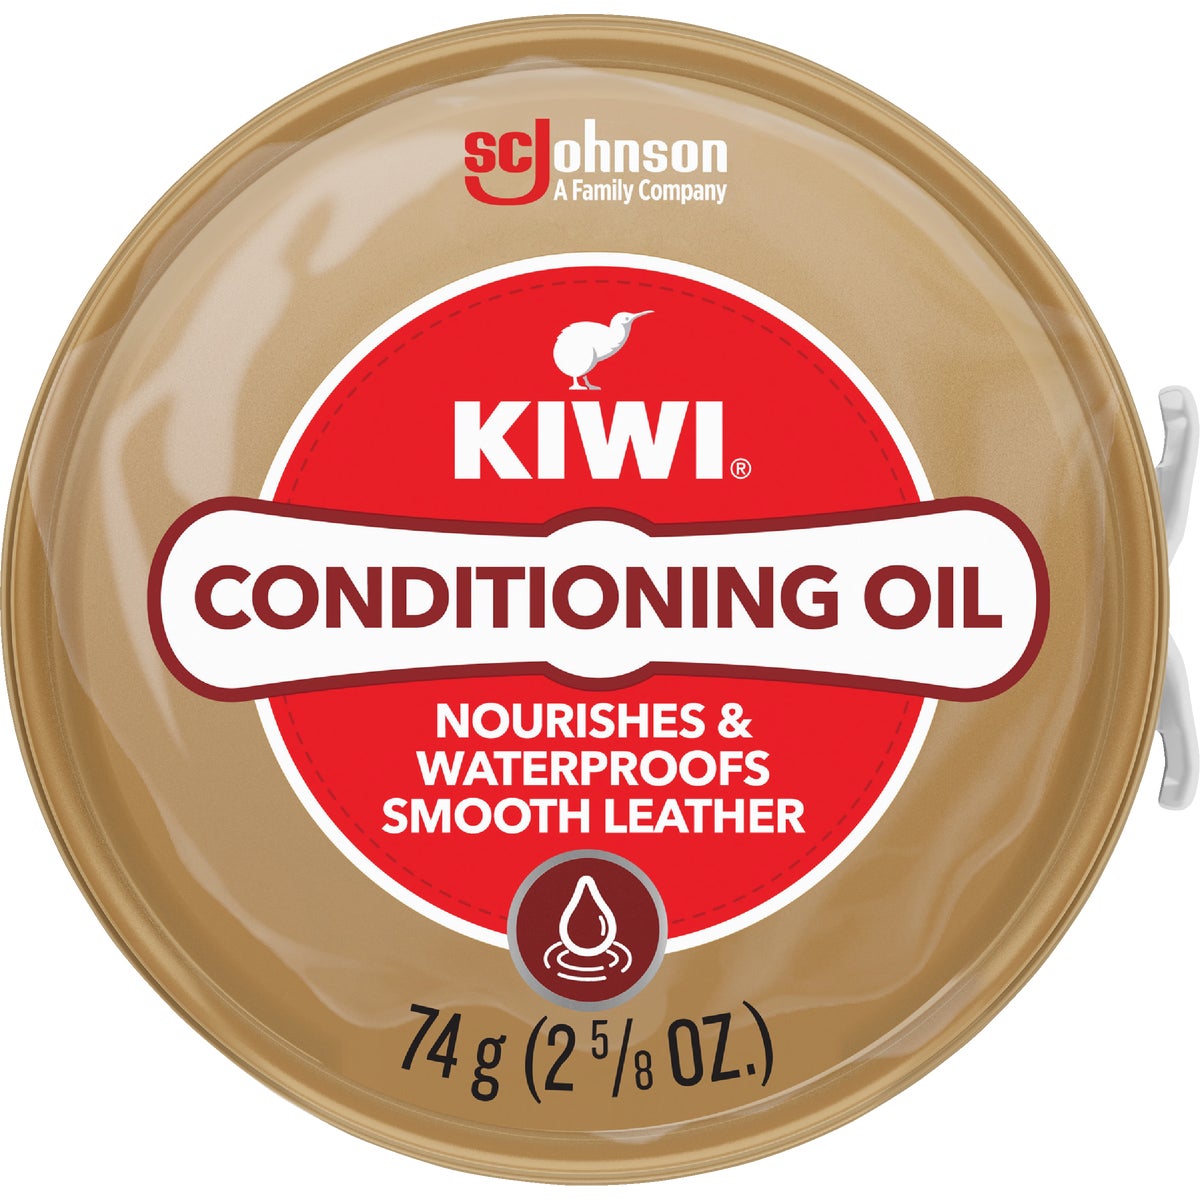 Item 704351, Conditioning oil that contains a rich blend of conditioners to nourish and 